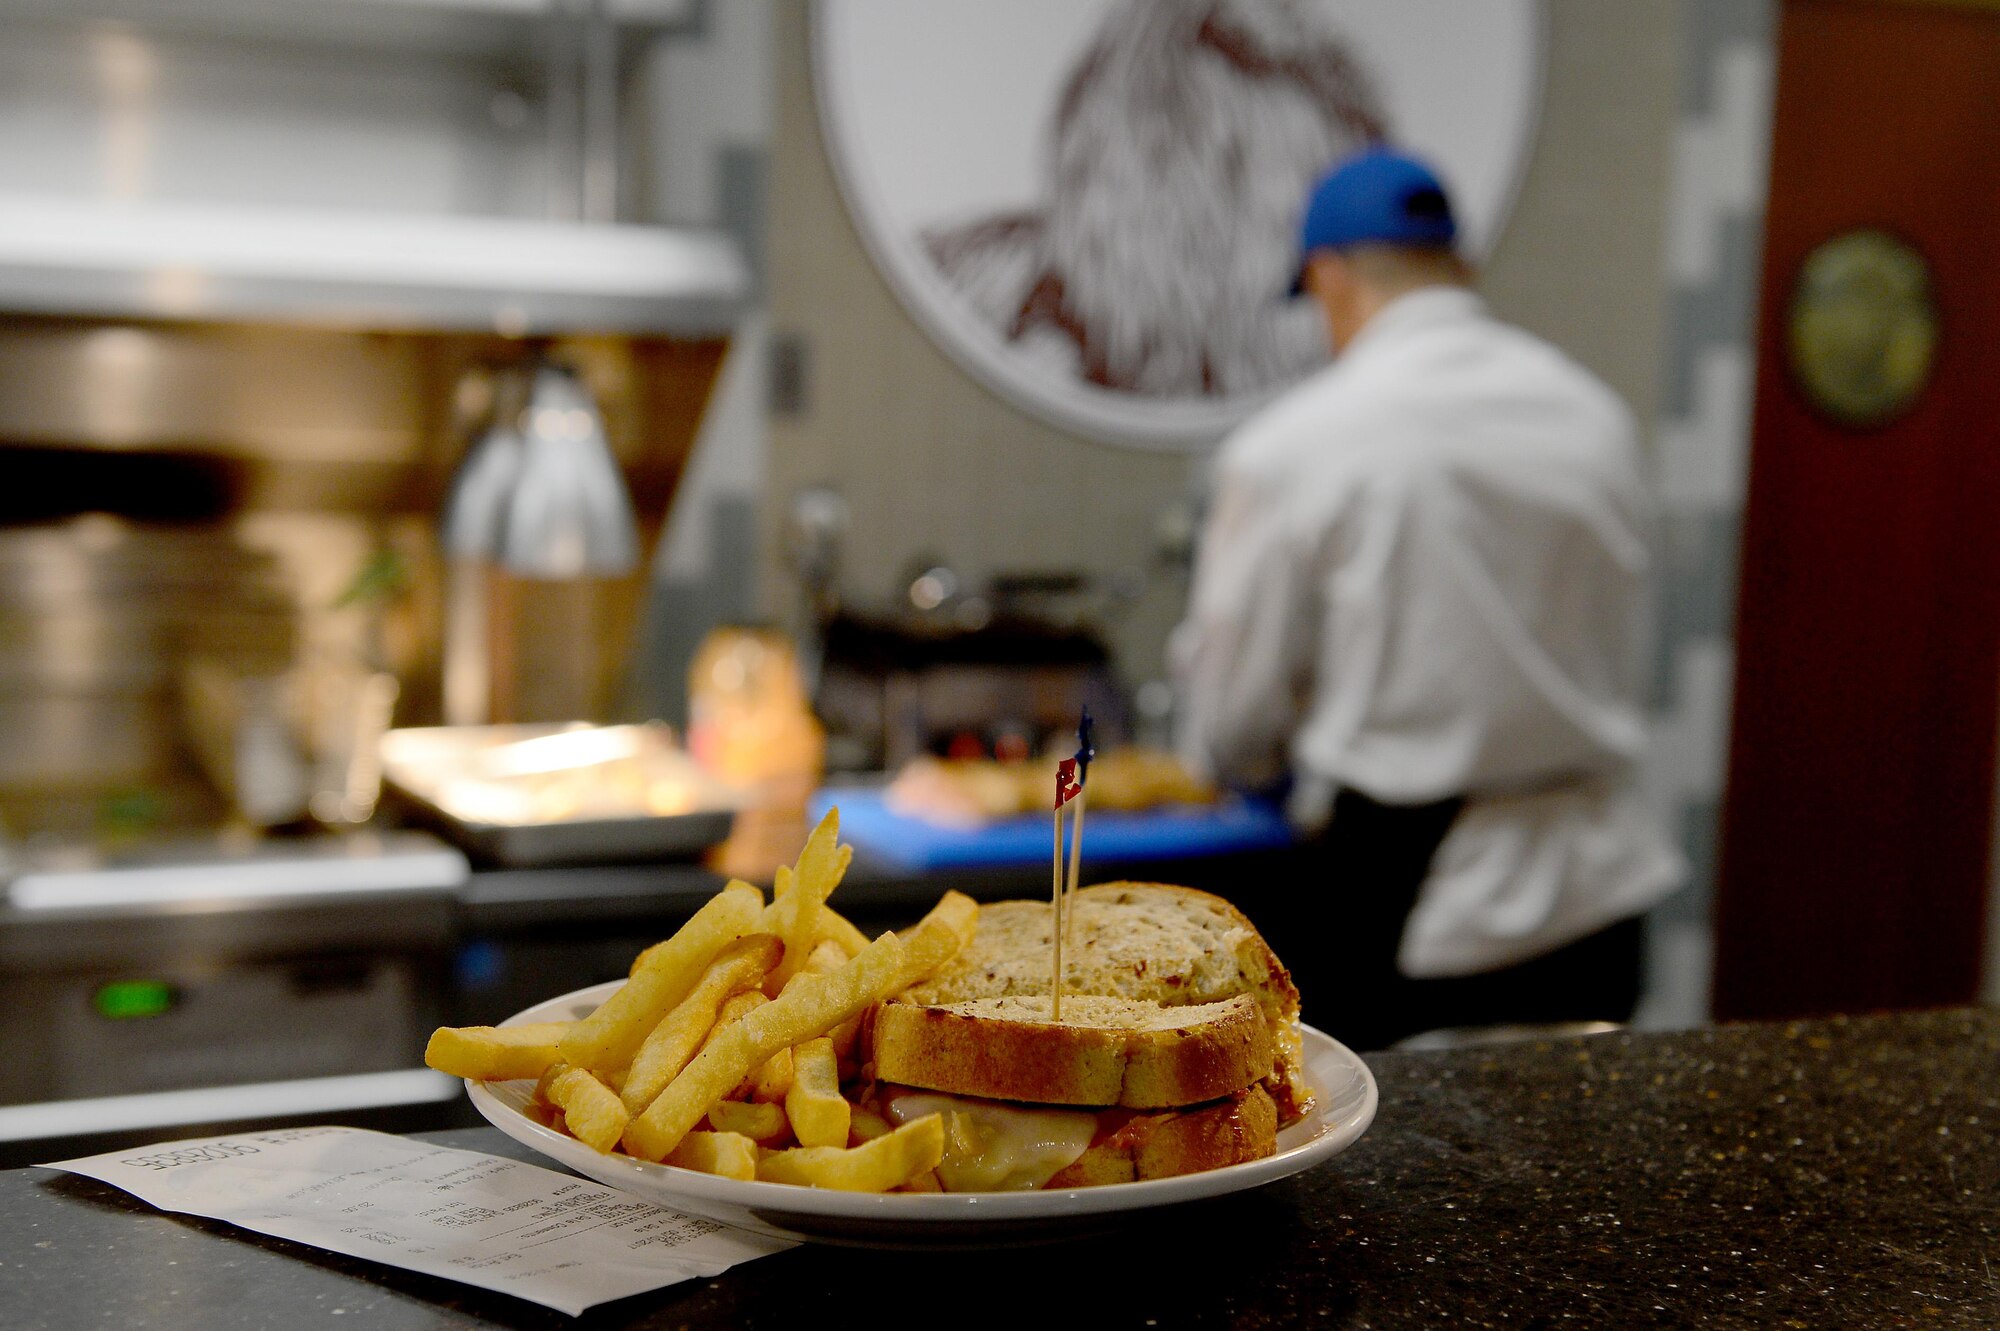 A reuben sandwich, prepared by Derek Torrence, McChord Club executive chef, waits to be picked up at McChord Grill, May 10, 2017 at Joint Base Lewis-McChord, Wash. Torrence was afforded the chance to make his dream of becoming a chef real when he went to Culinary Arts School and graduated from Johnson & Wales University in 2008. (U.S. Air Force photo/Senior Airman Divine Cox)